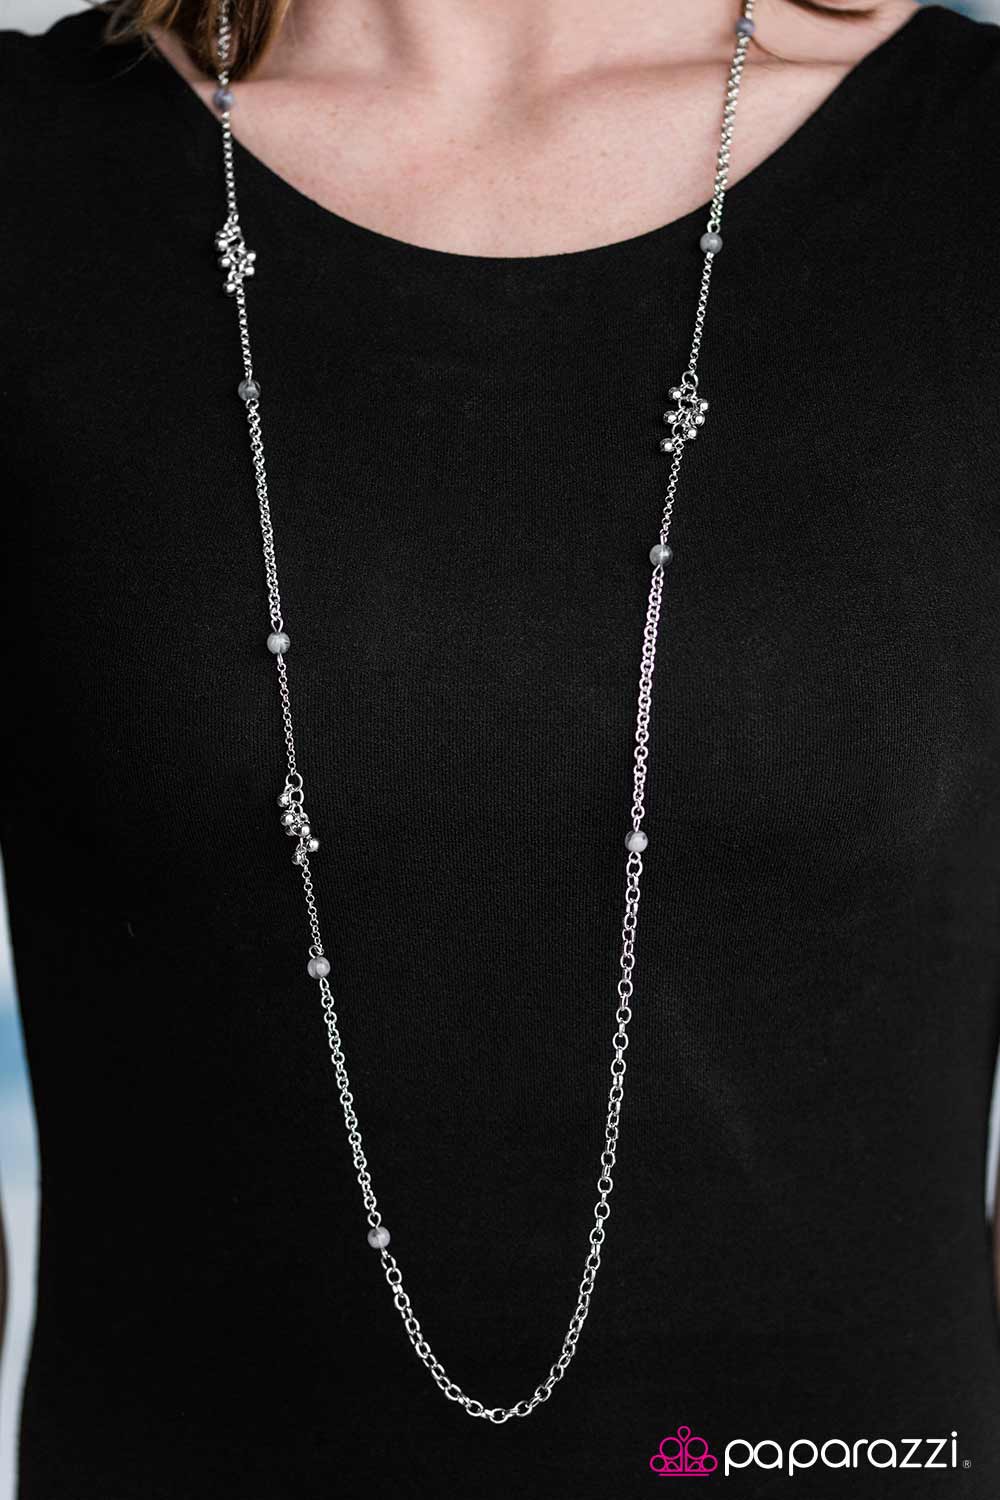 Twinkling Twilight - Silver - Paparazzi necklace